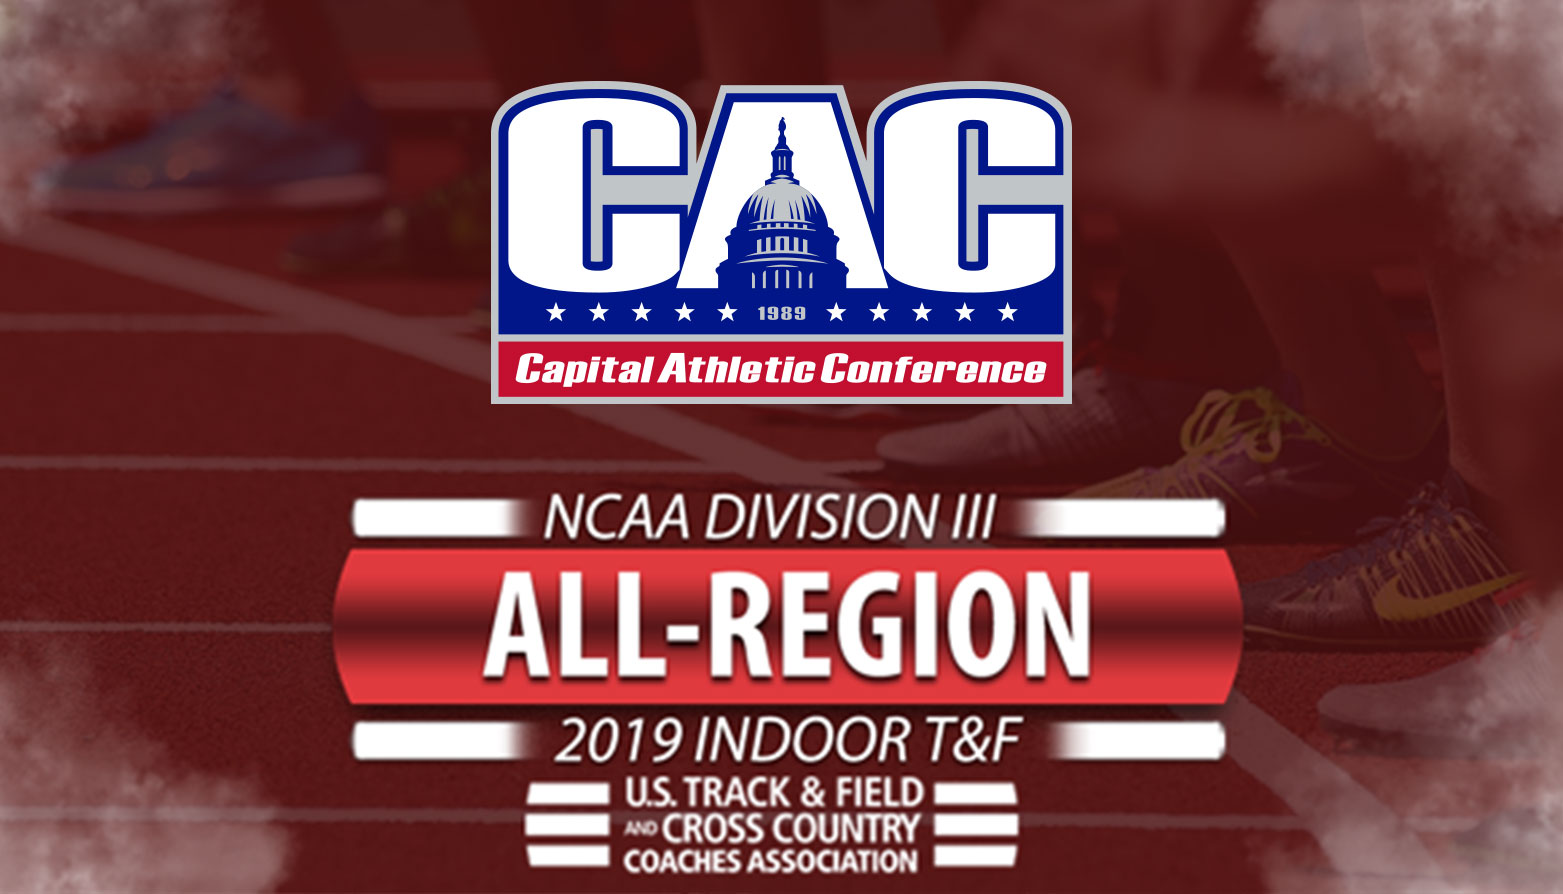 CAC Lands 62 USTFCCCA Indoor Track & Field All-Region Honorees